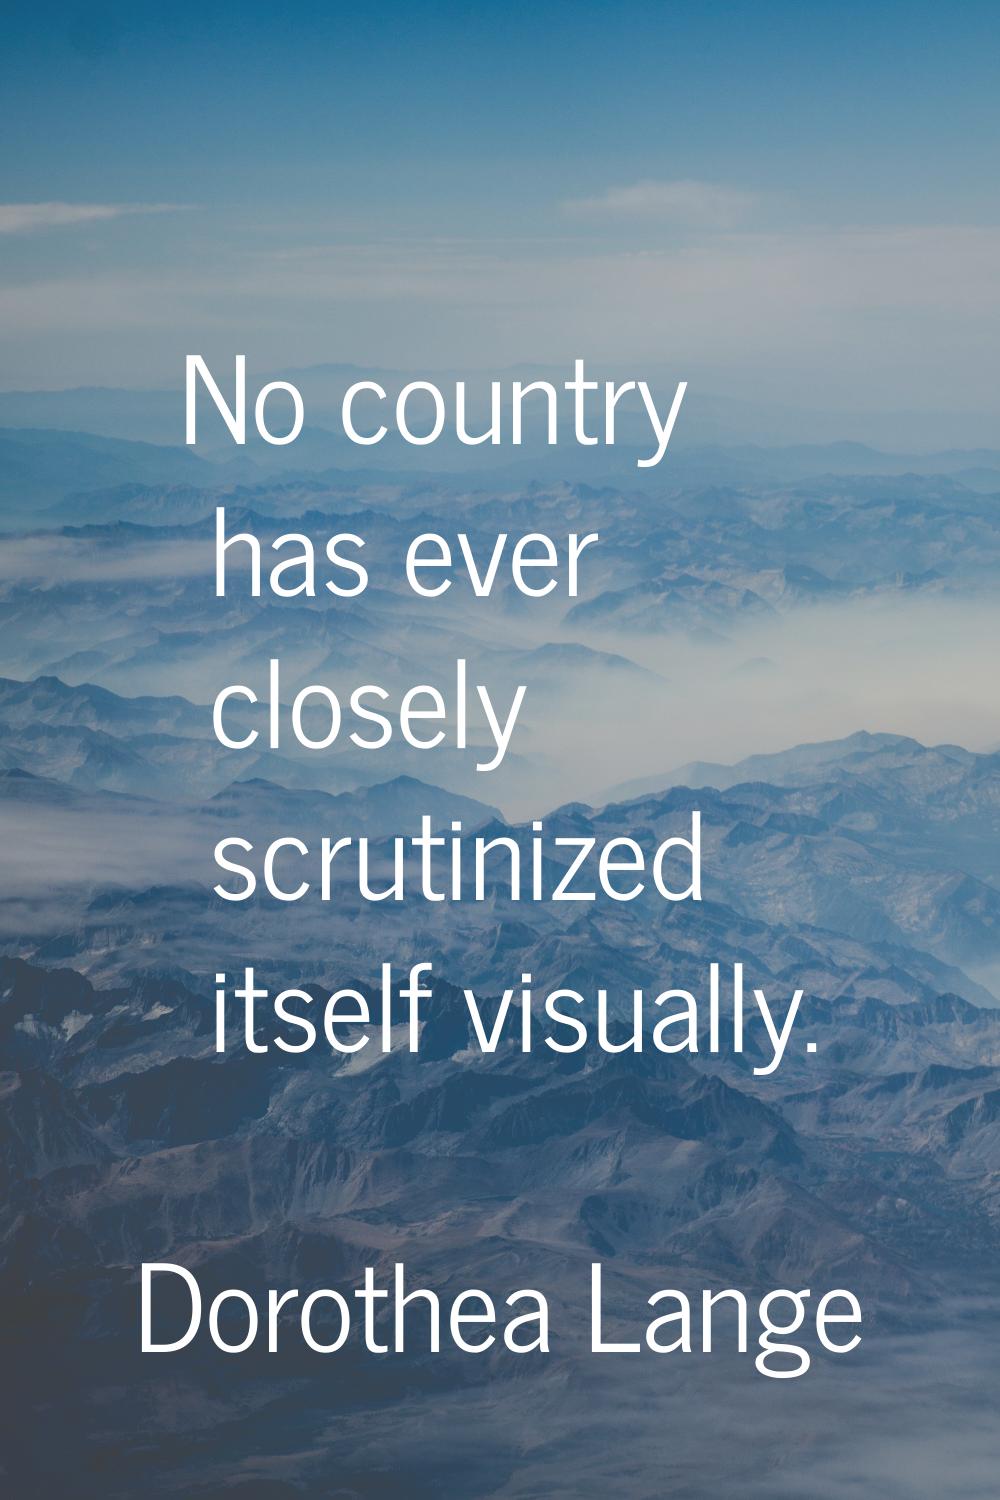 No country has ever closely scrutinized itself visually.